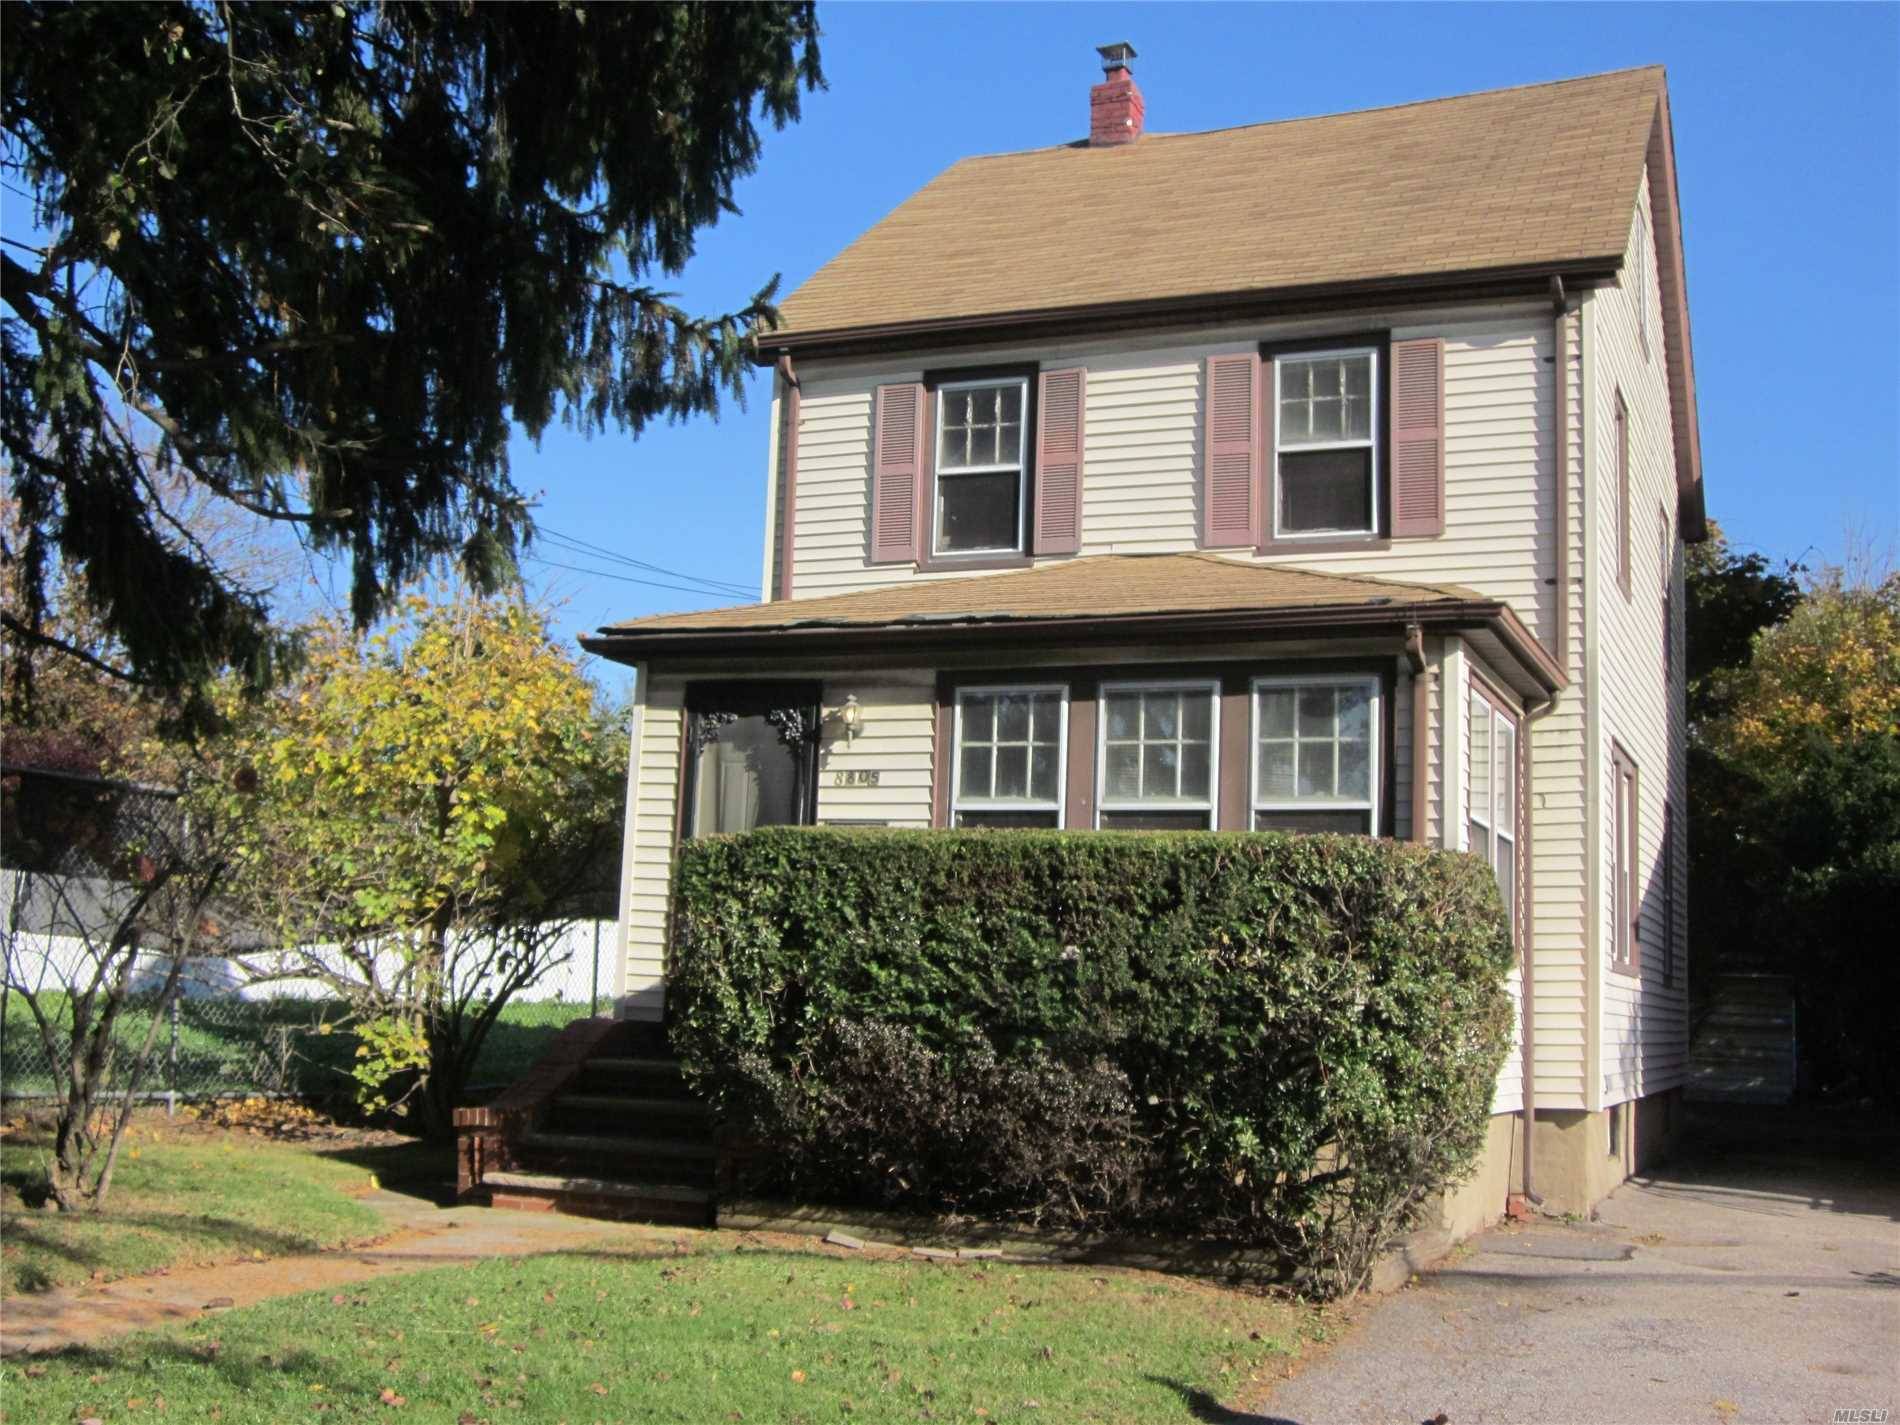 Four Bedroom, Colonial Sits On A Huge 45 X 173 Lot In Much Desirable Section Of Bellerose.